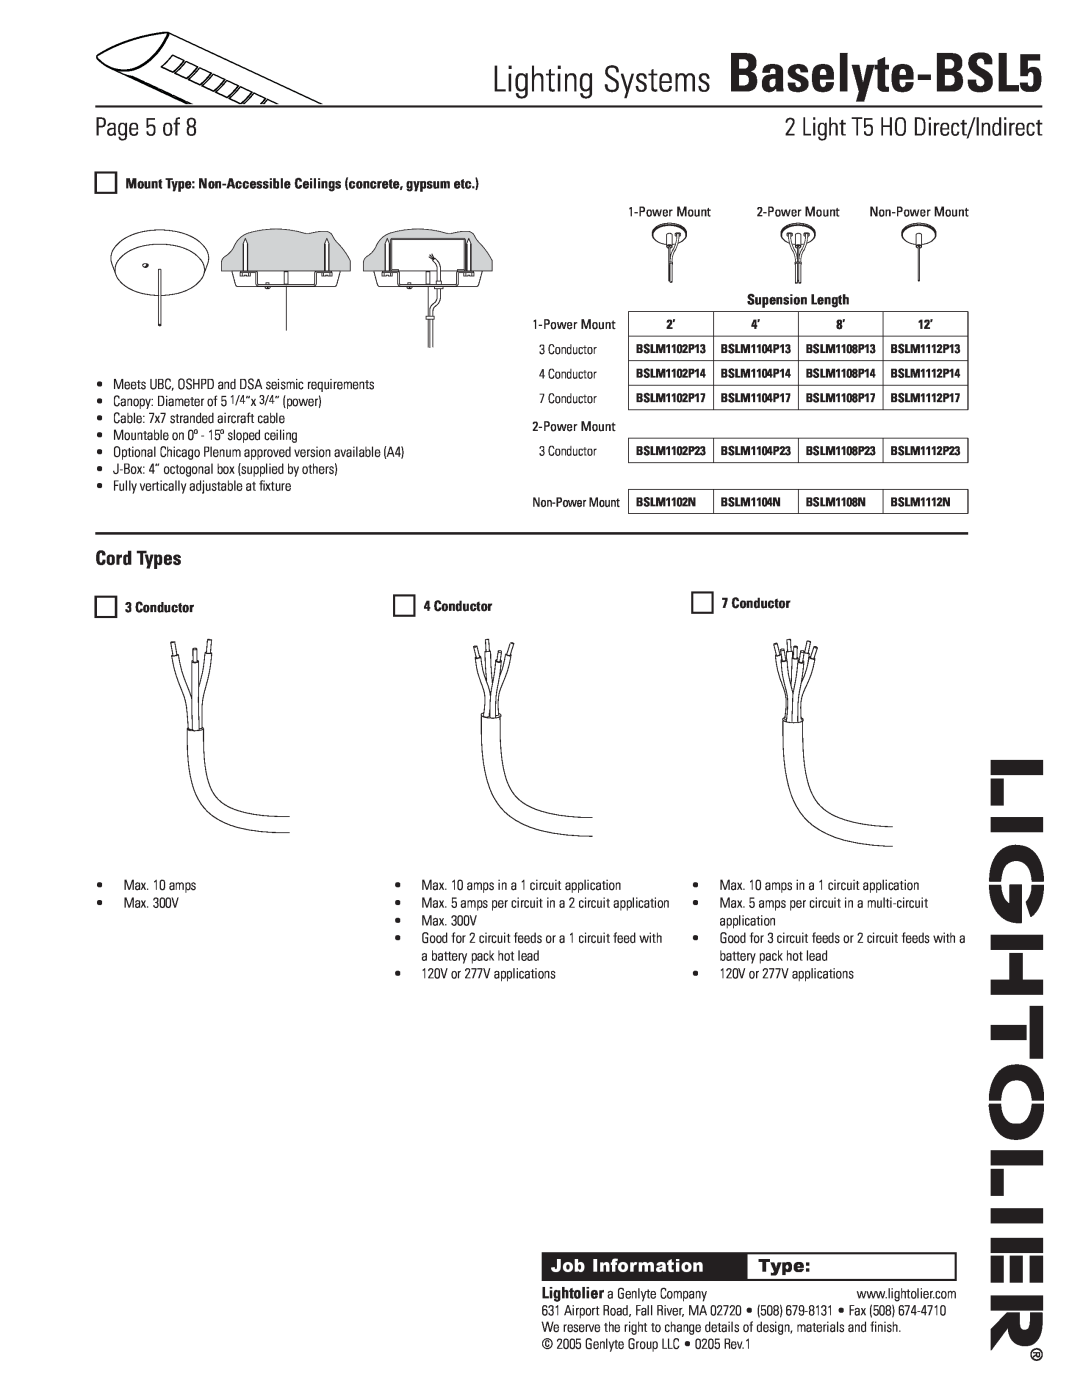 Lightolier Cord Types, Conductor, Lighting Systems Baselyte-BSL5, Page of, Light T5 HO Direct/Indirect, Job Information 